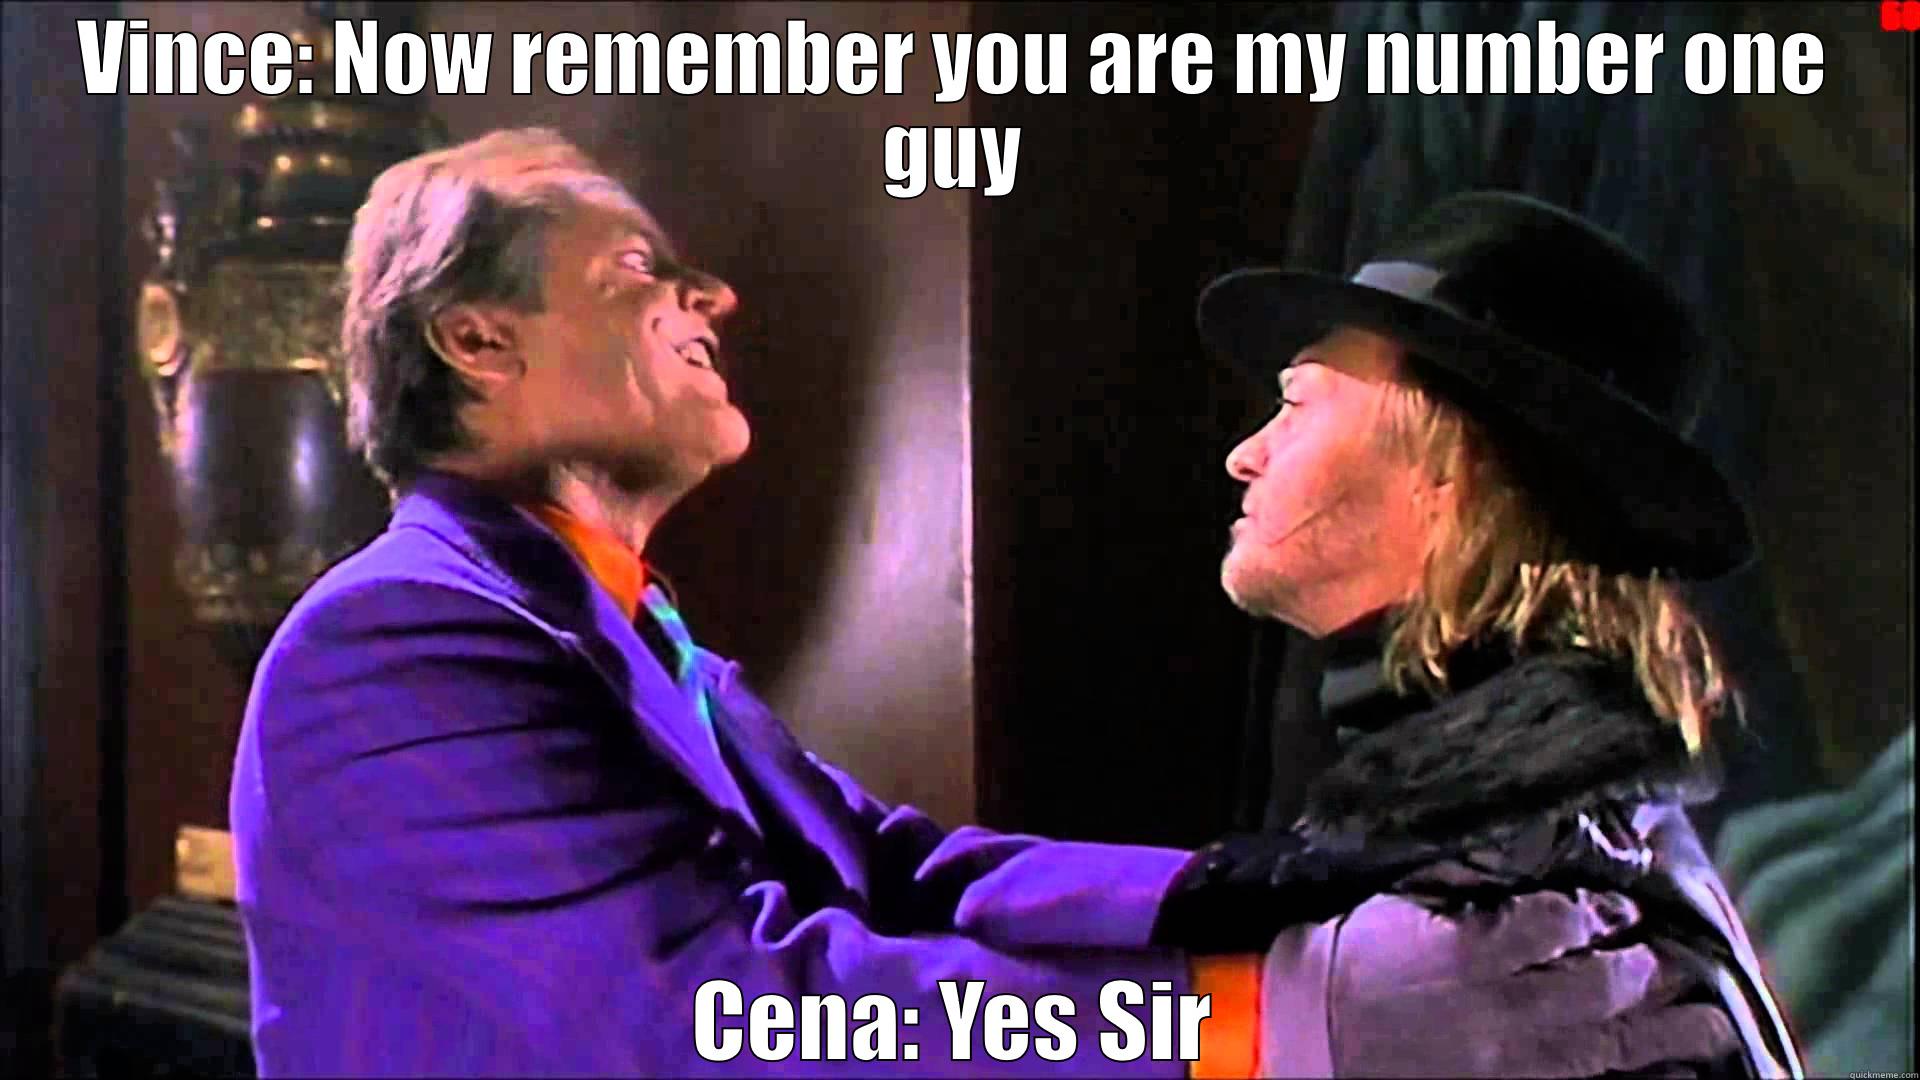 VINCE: NOW REMEMBER YOU ARE MY NUMBER ONE GUY CENA: YES SIR Misc